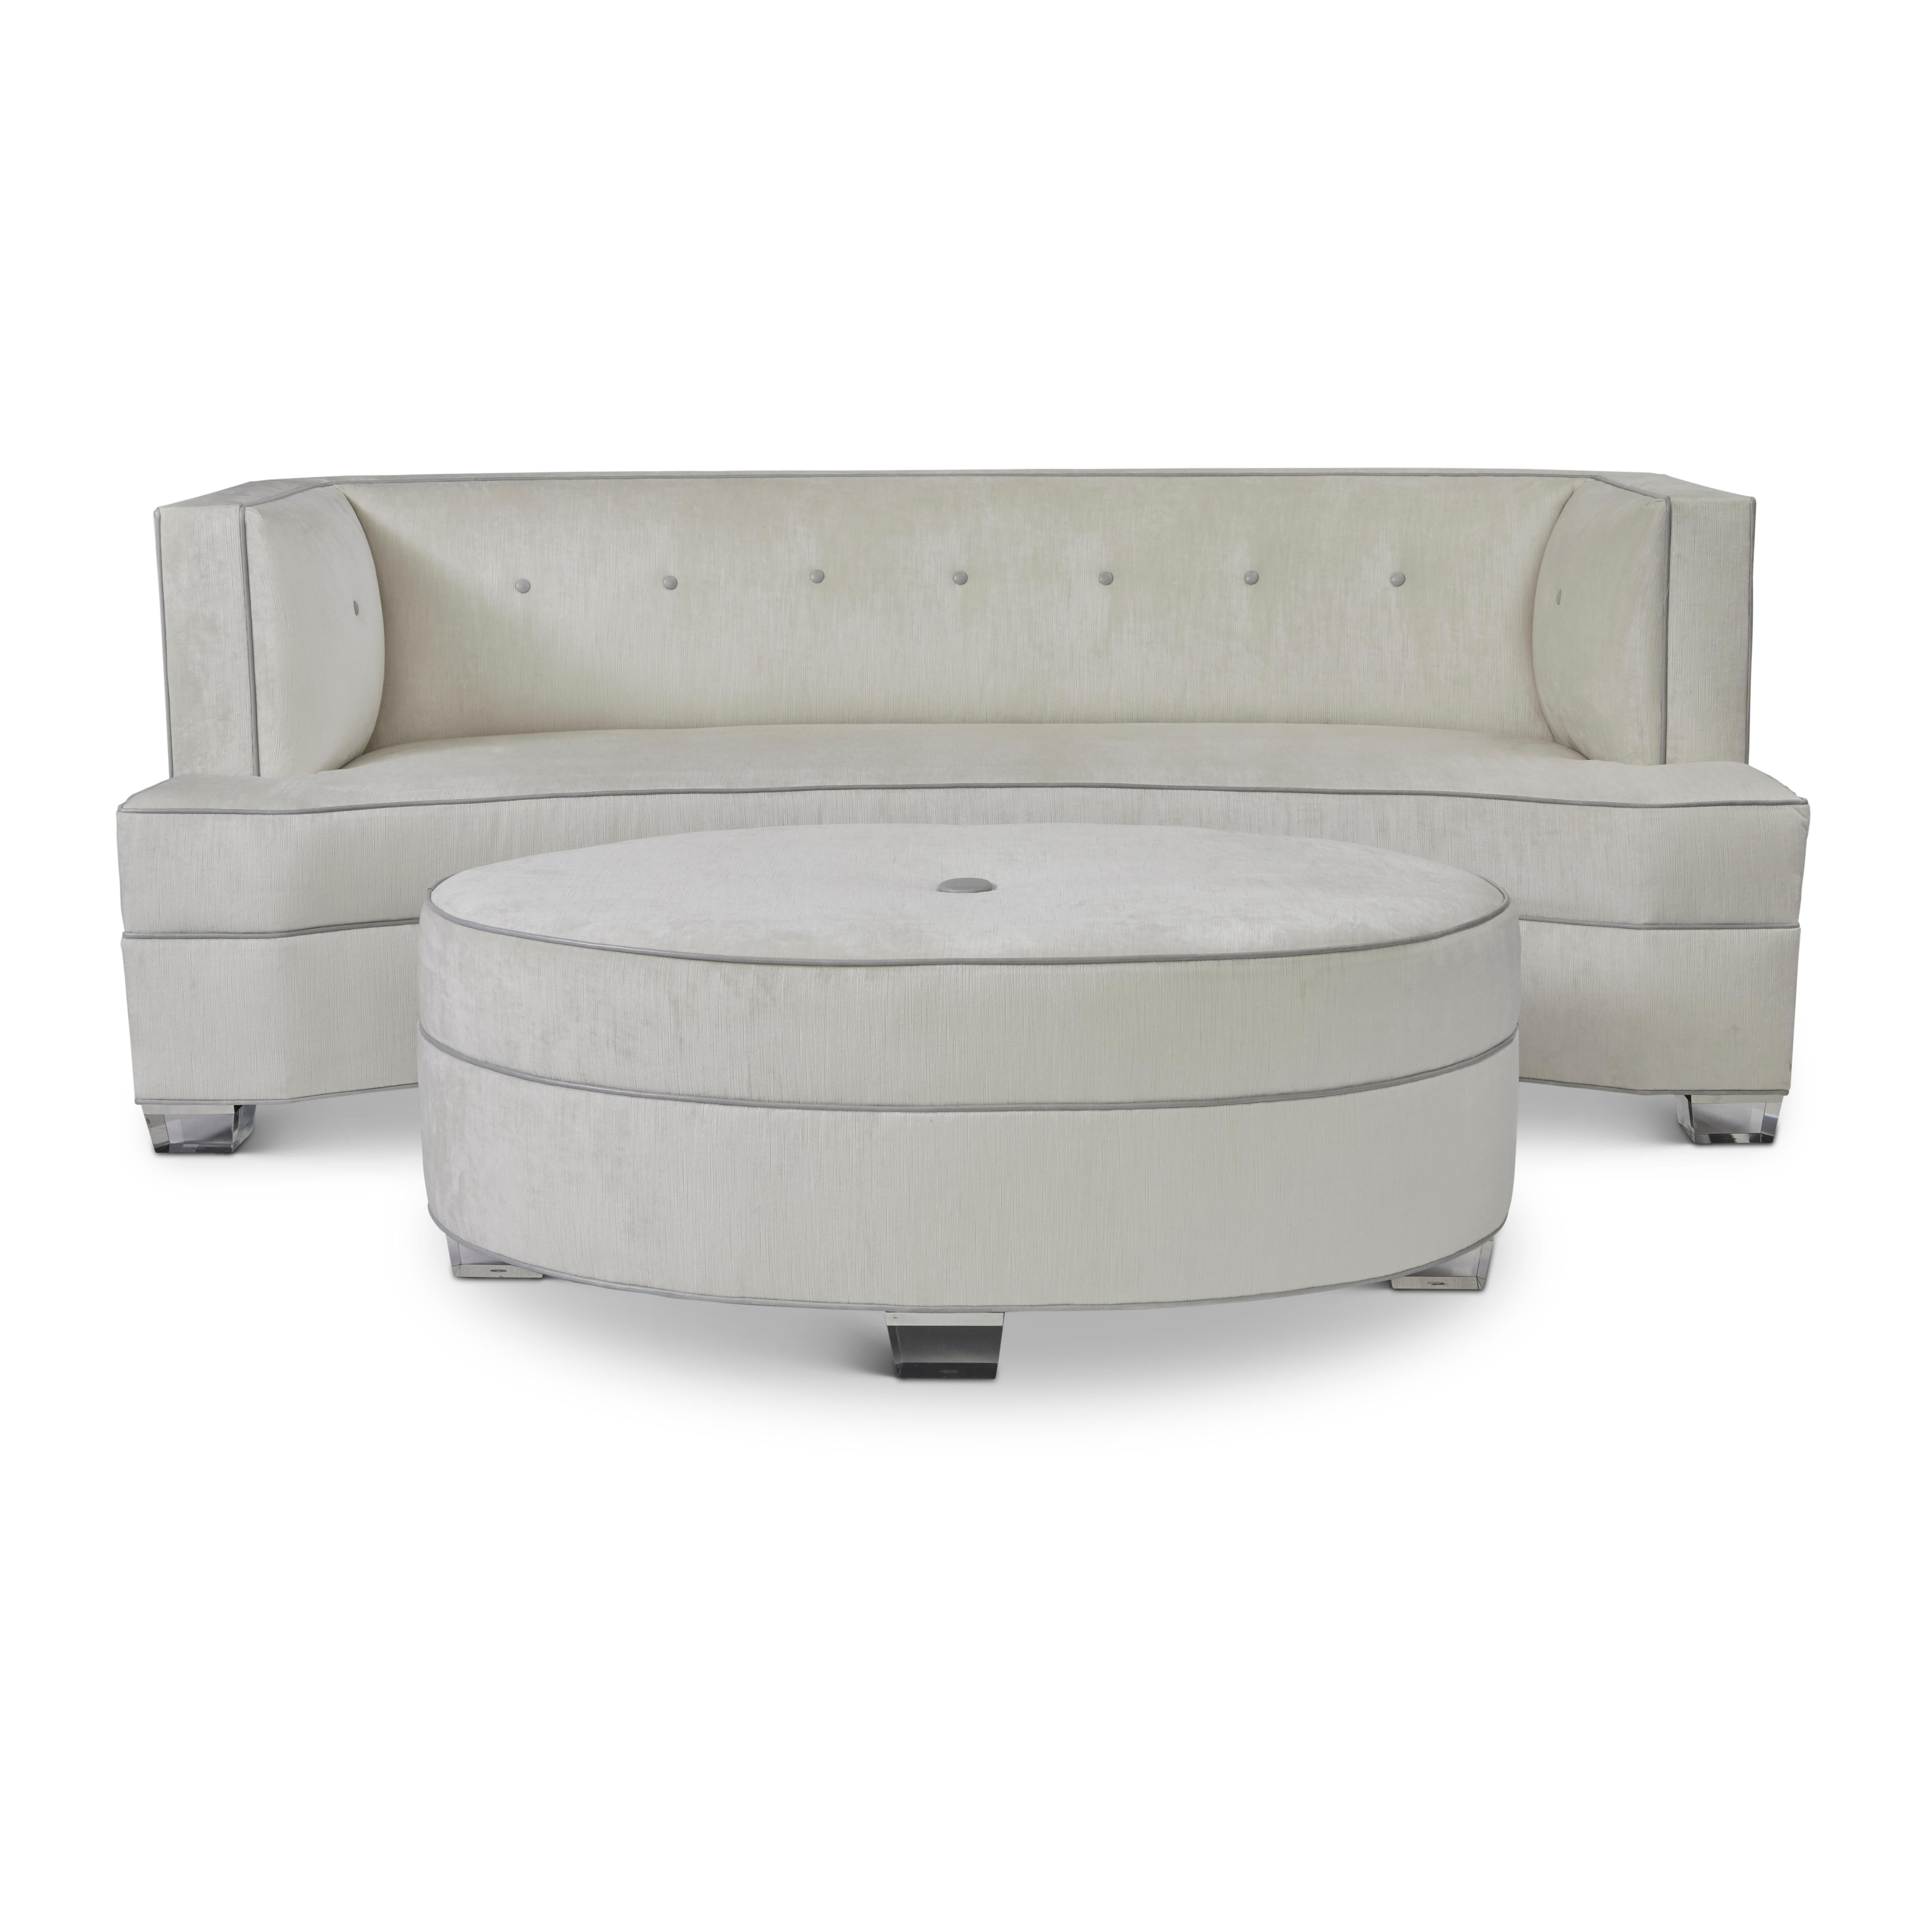 Hand-Crafted Art Deco Gabriella Ottoman Handcrafted by James by Jimmy Delaurentis For Sale